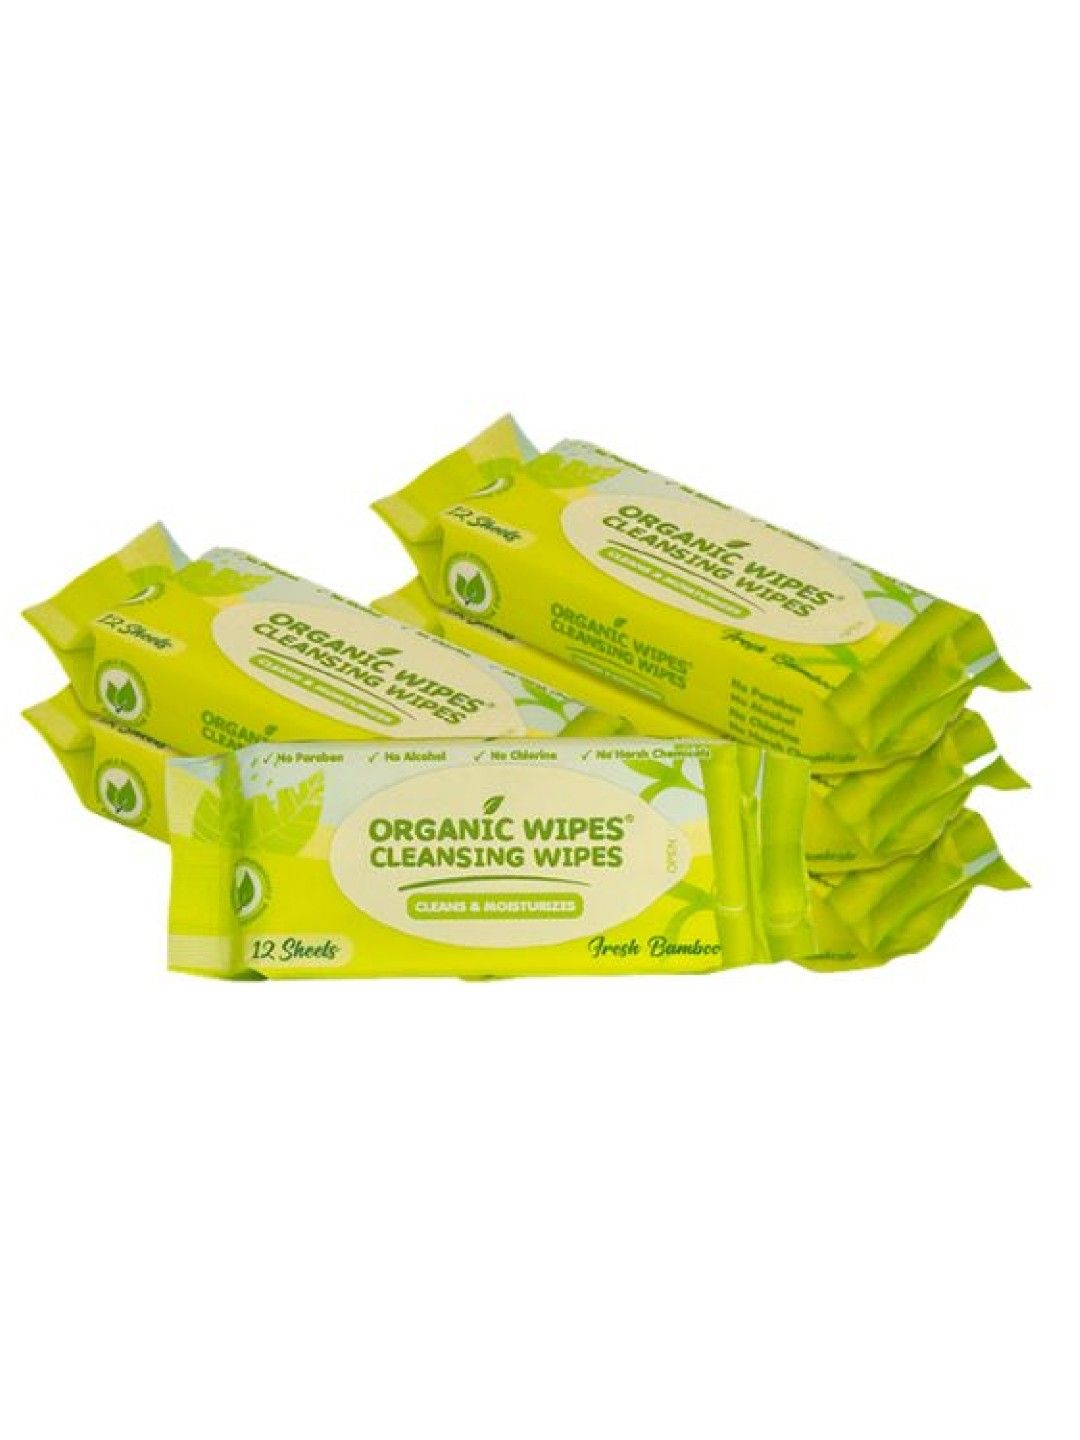 Organic Baby Wipes Organic Wipes Cleansing Wipes Fresh Bamboo (12s x 6-pack)